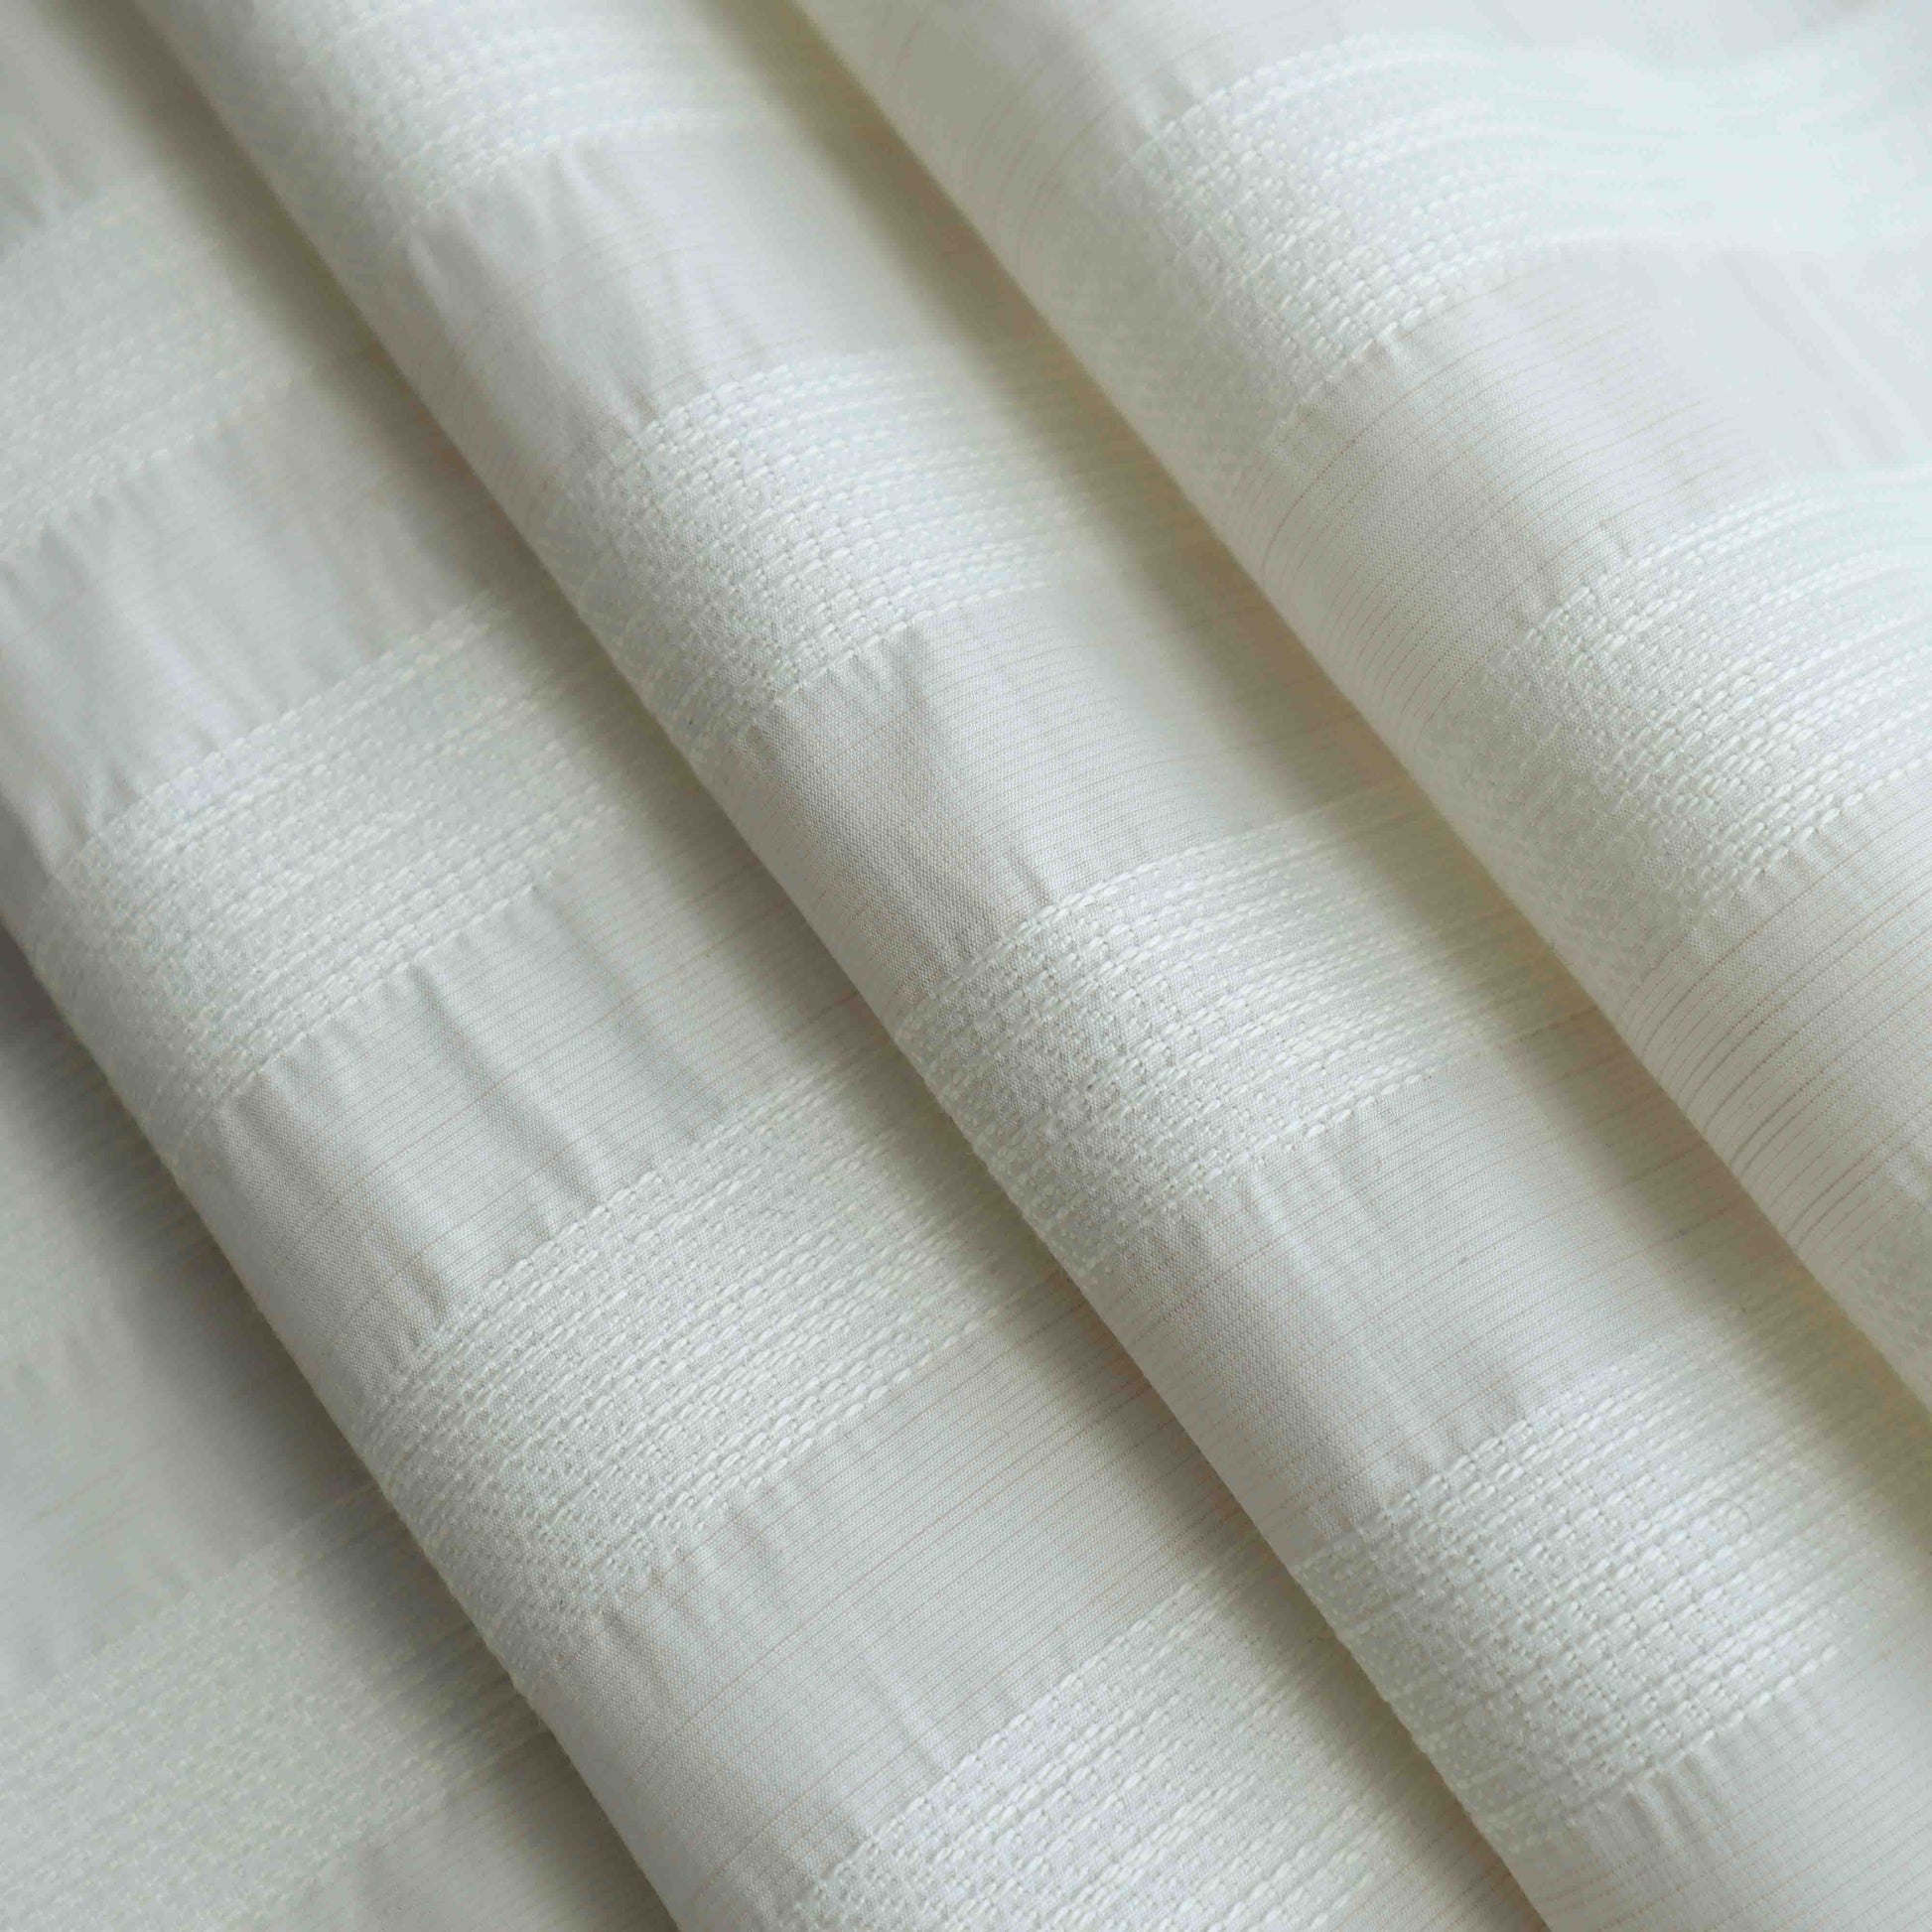 A Japanese-made lightweight poly cotton in off stitch. This fabric is designed with neatly arranged white stripes. This fabric is soft, comfortable with its no-stretch properties.